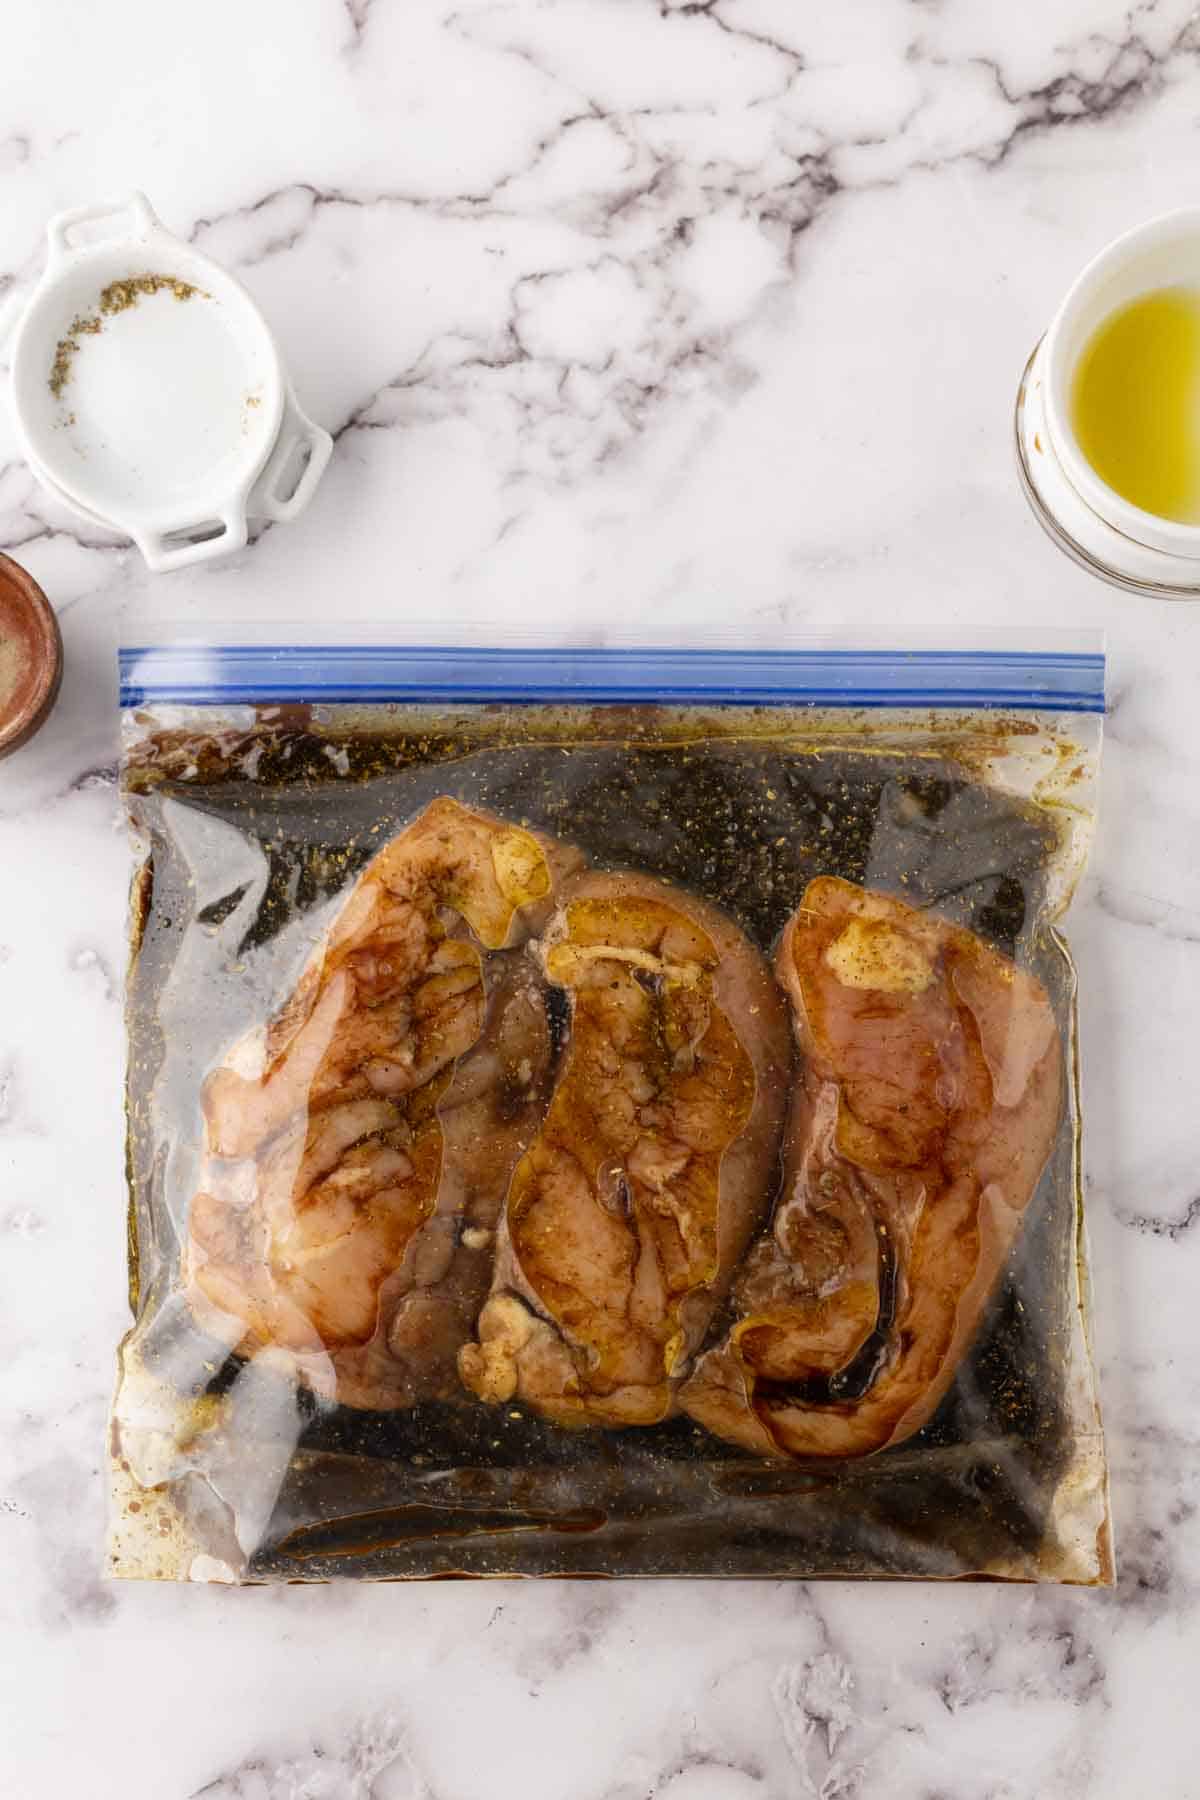 zip lock back with raw chicken breasts in homemade marinade.